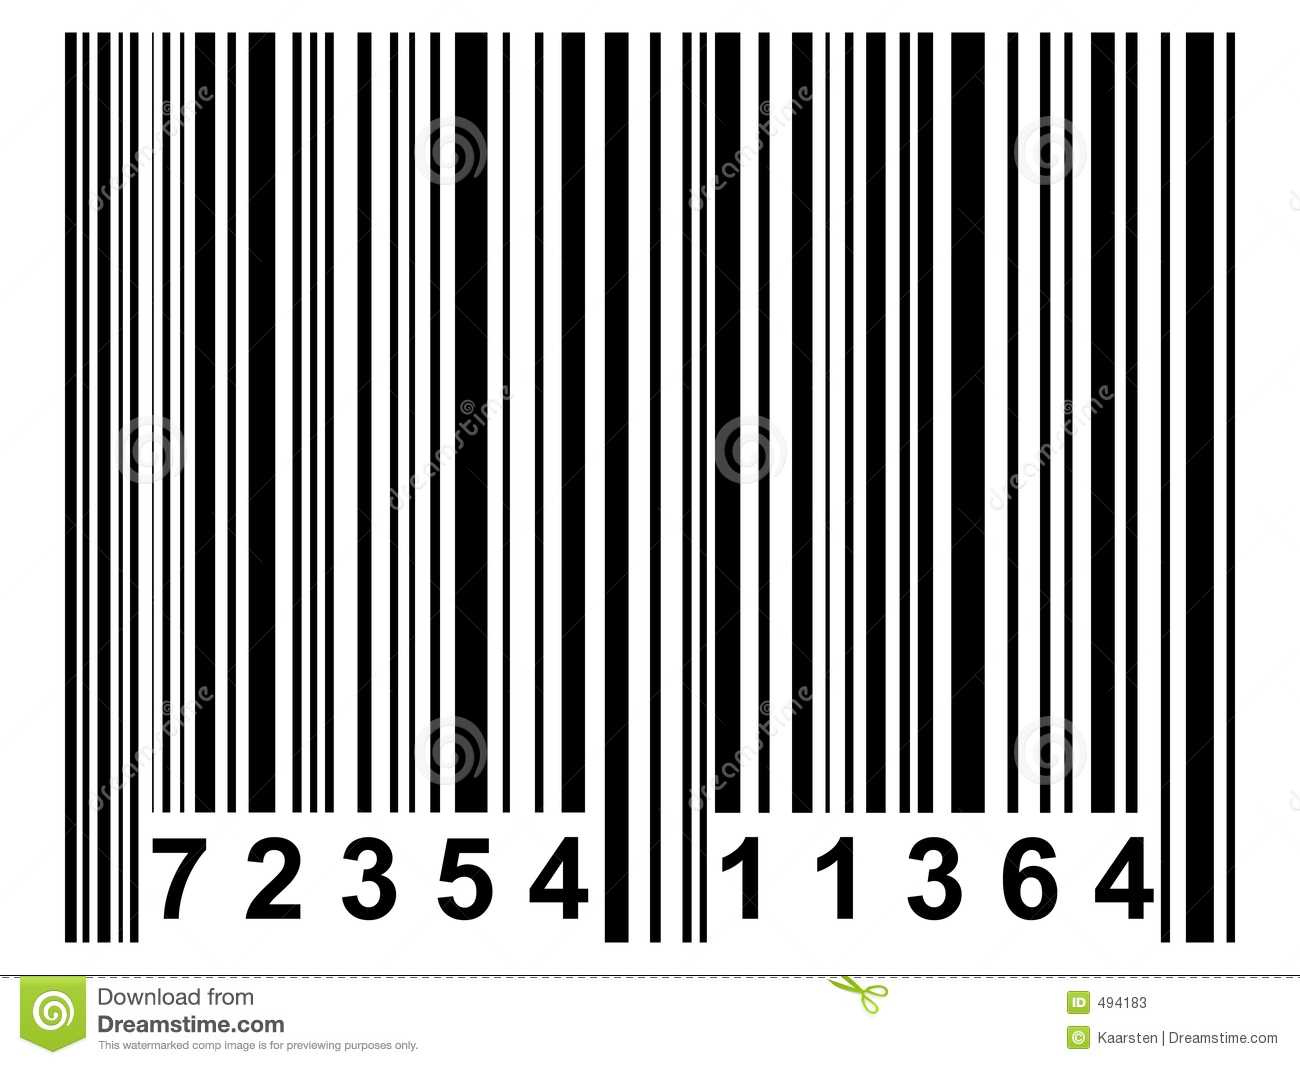 Simple Black Barcode Like It Is Used On Nearly All Products